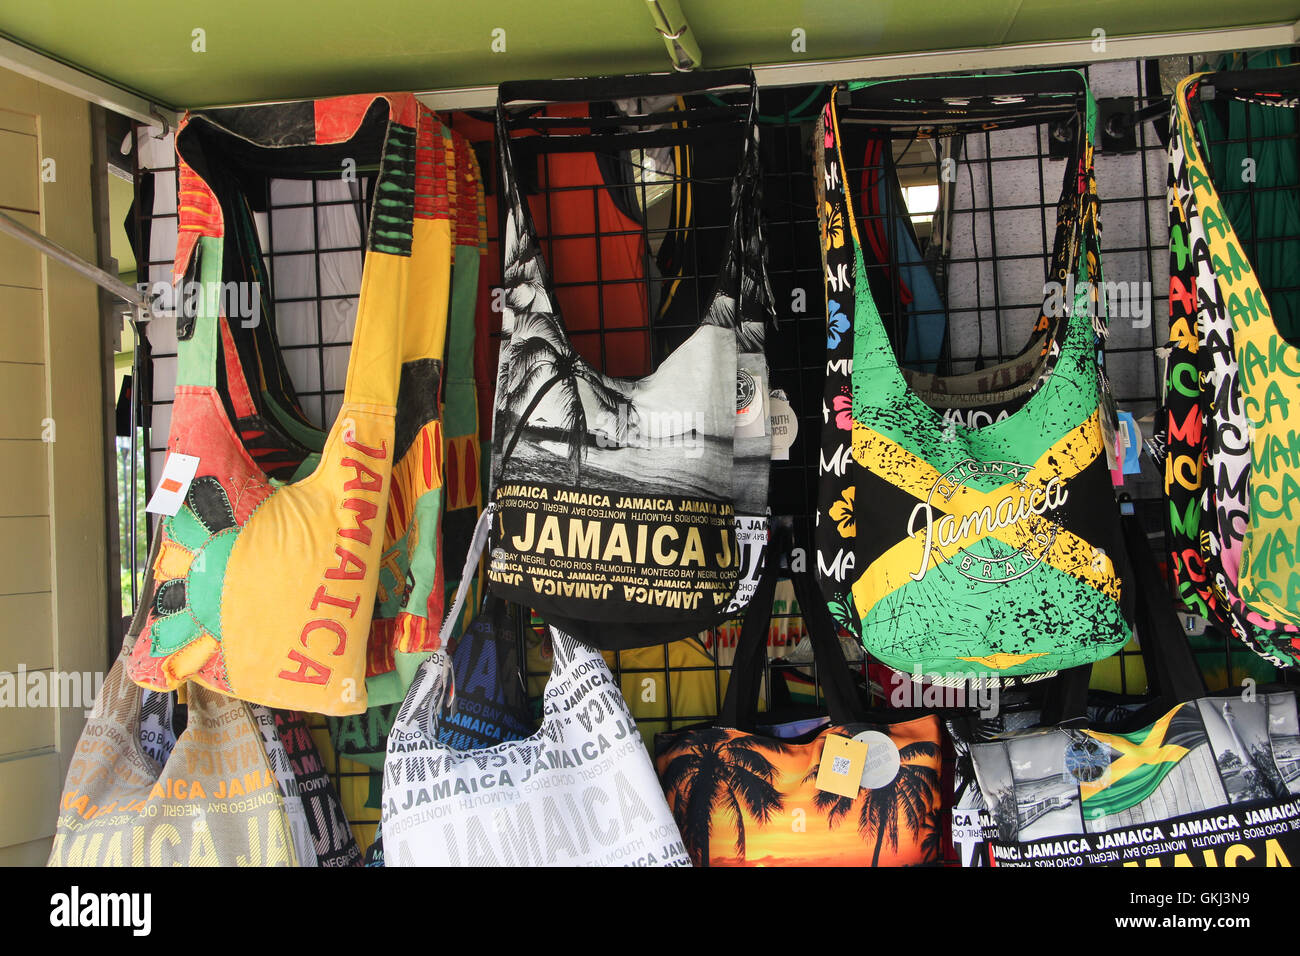 Jamaica port vendors, flag townspeople, old Jamaica souvenirs, shops in Jamaica, Falmouth's port, tourists disembarked, purses, Stock Photo